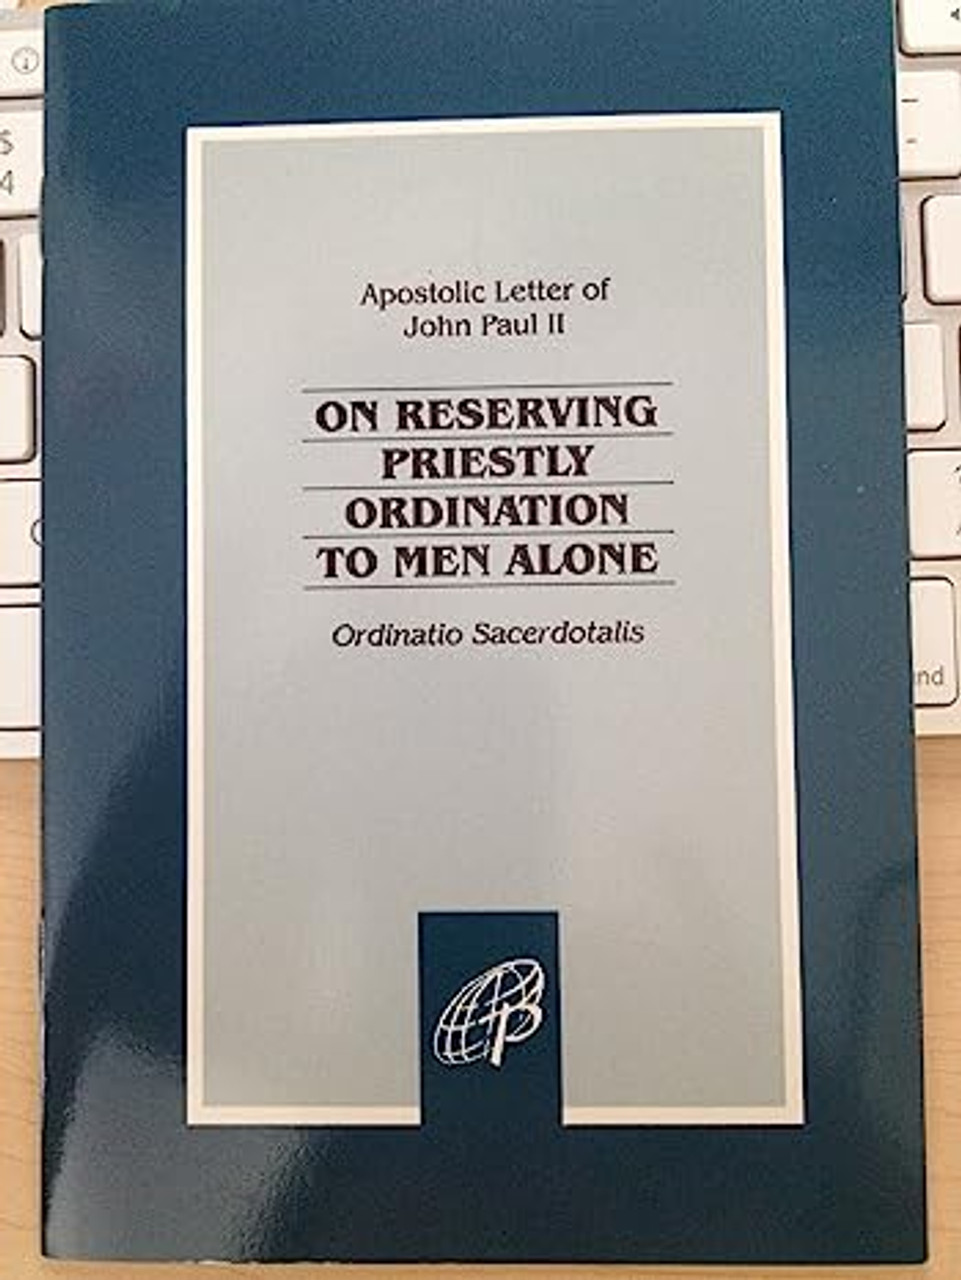 On Reserving Priestly Ordination to Men Alone, Apostolic Letter of John Paul II